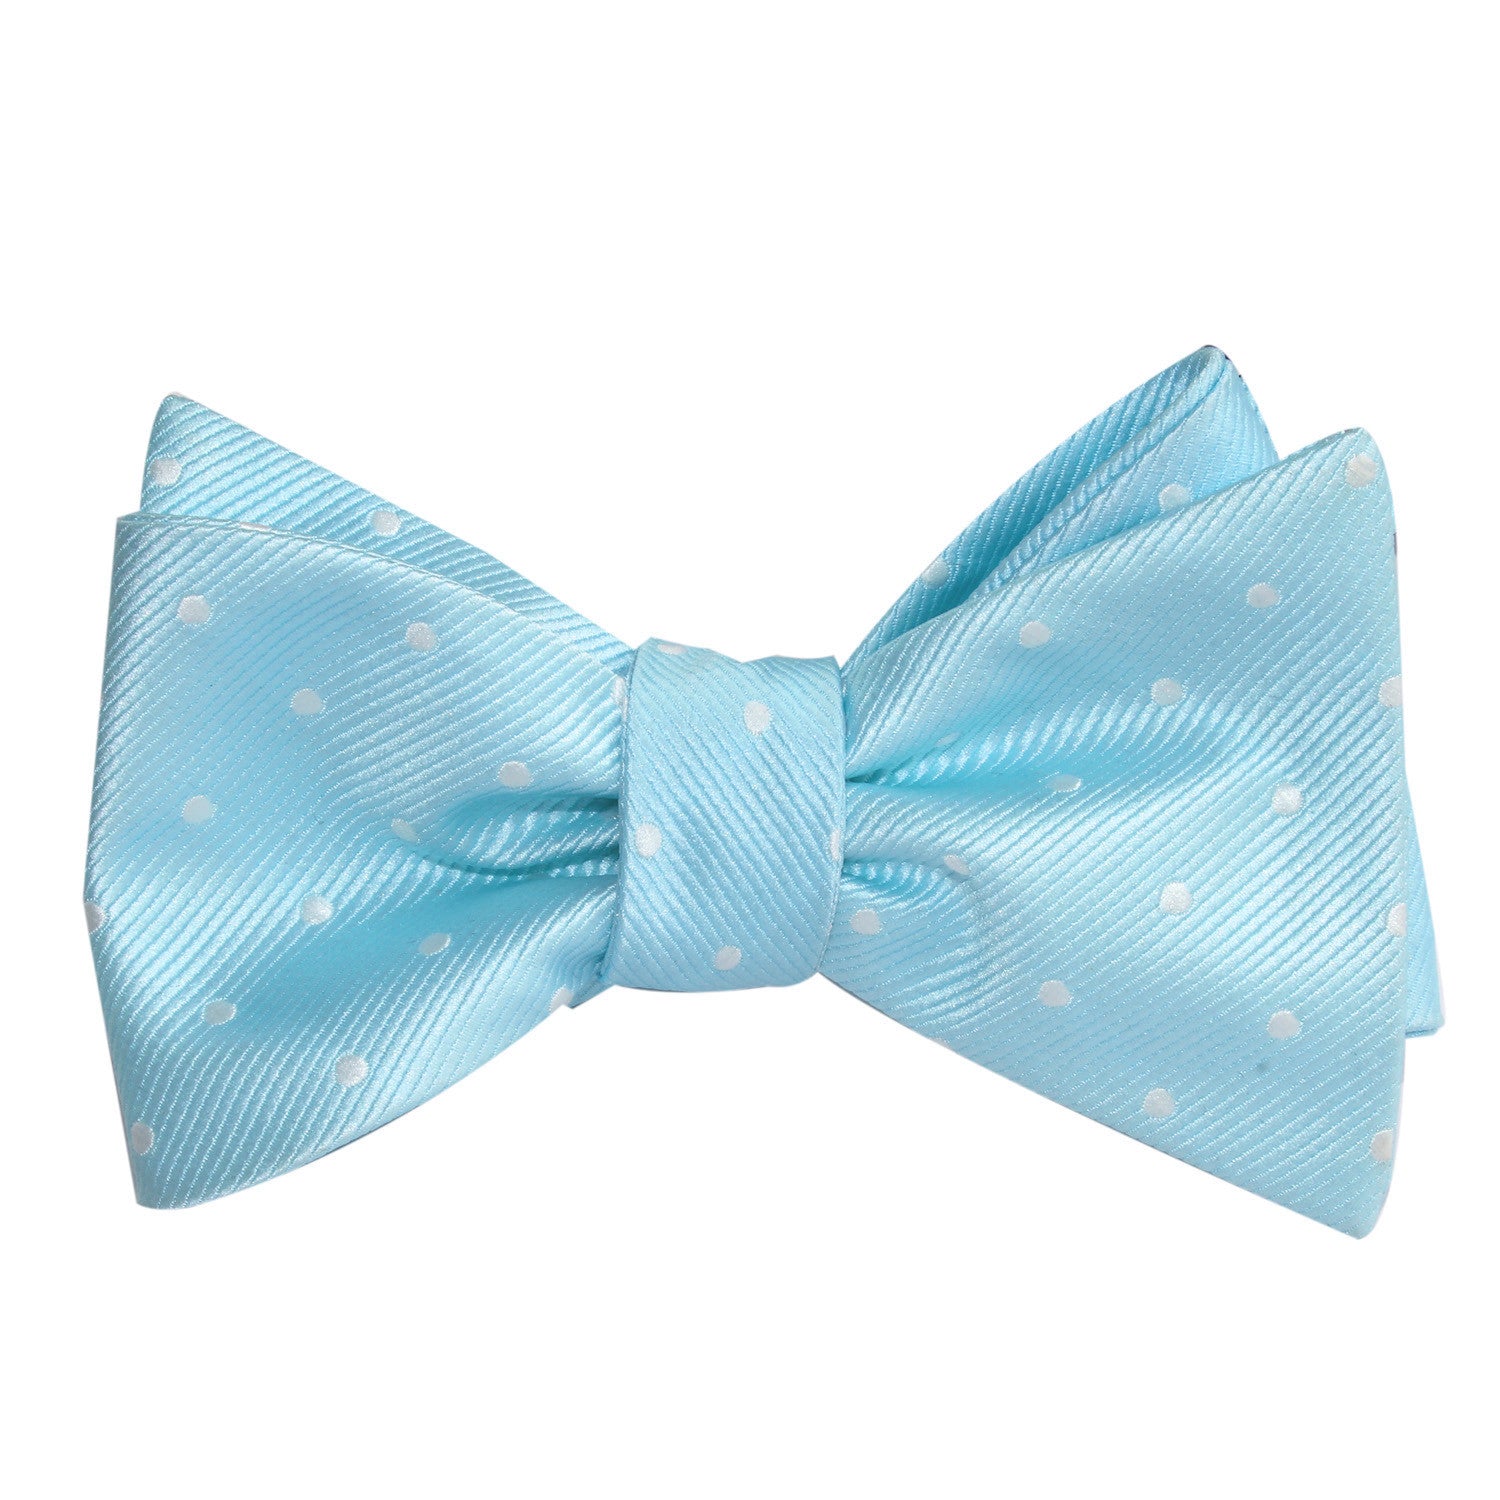 The OTAA Mint Blue with White Polka Dots Self Tie Bow Tie 1